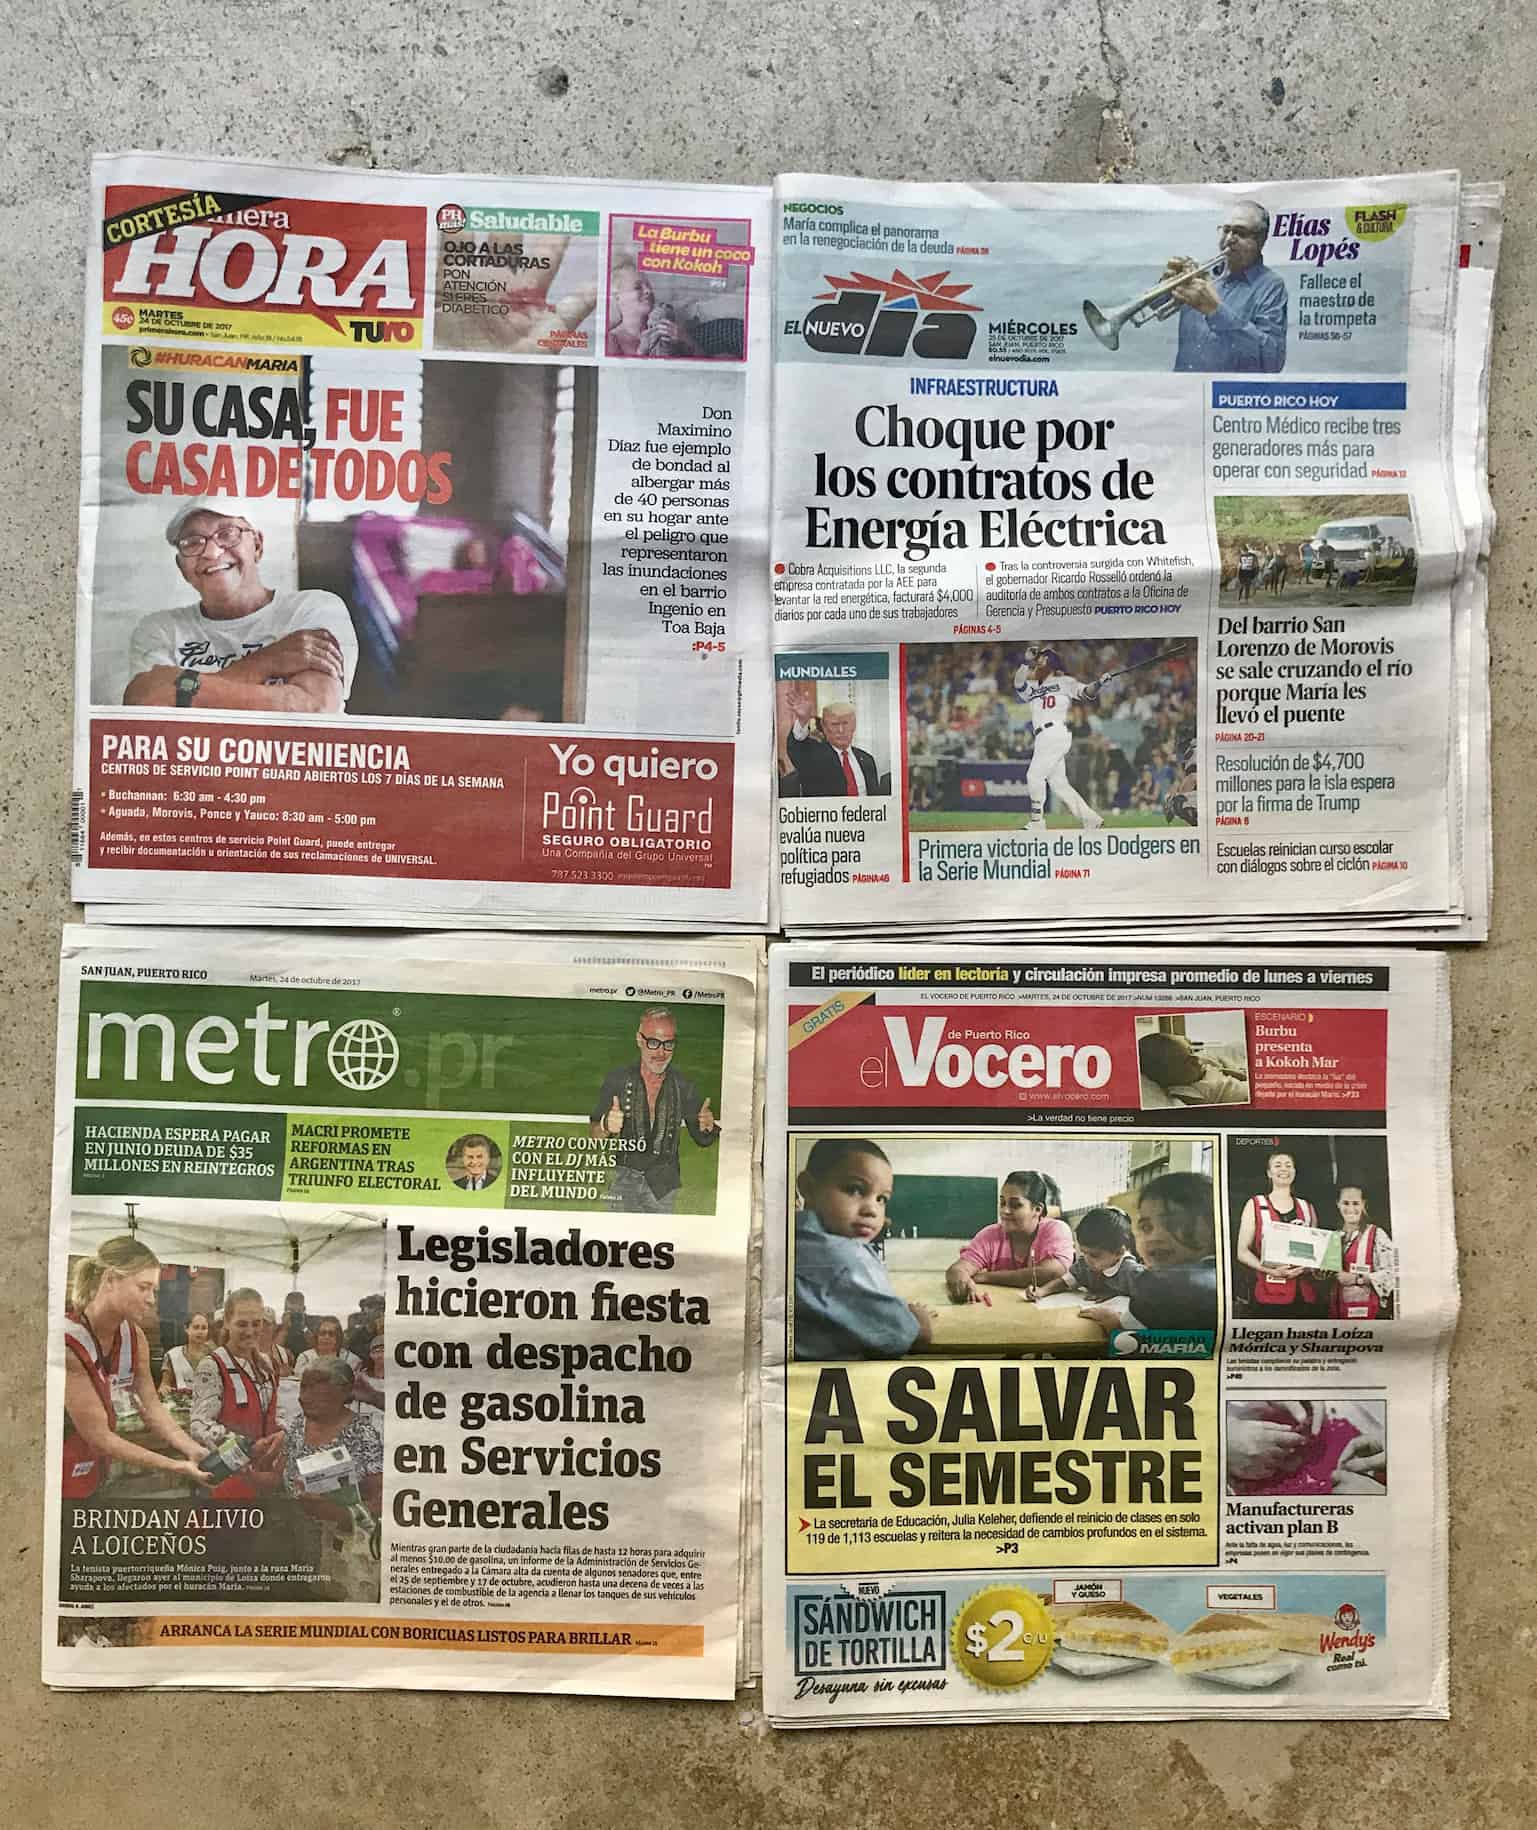 The front pages of 4 newspapers are tacked on a wall